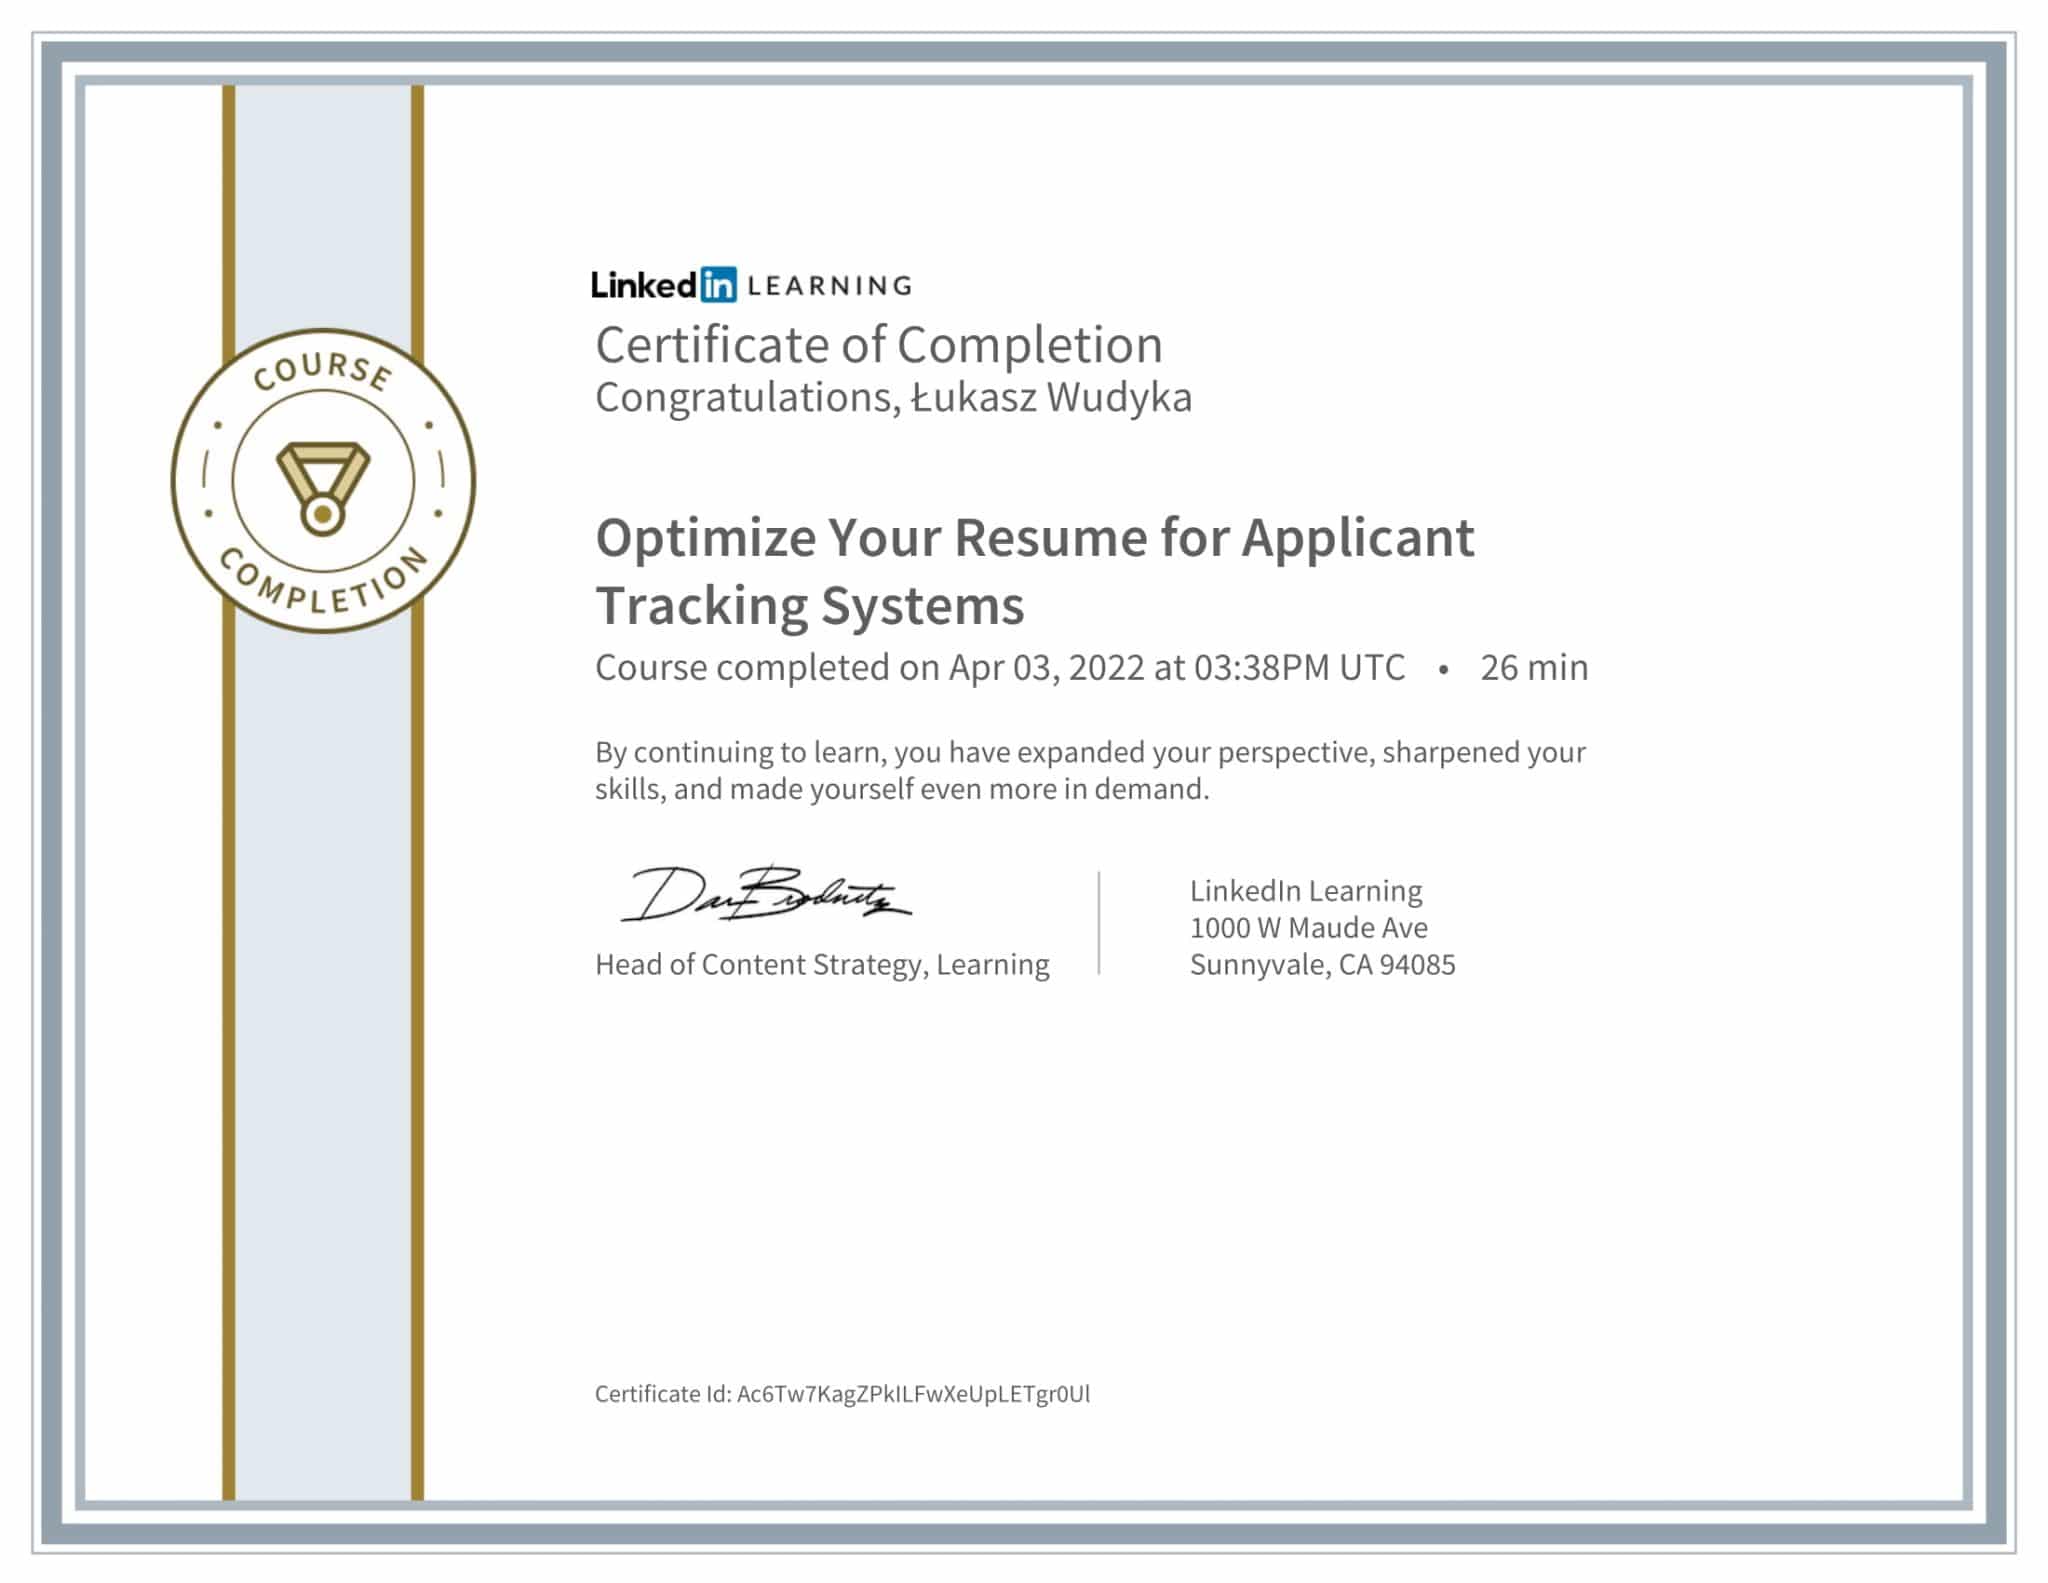 CertificateOfCompletion_Optimize Your Resume for Applicant Tracking Systems-1